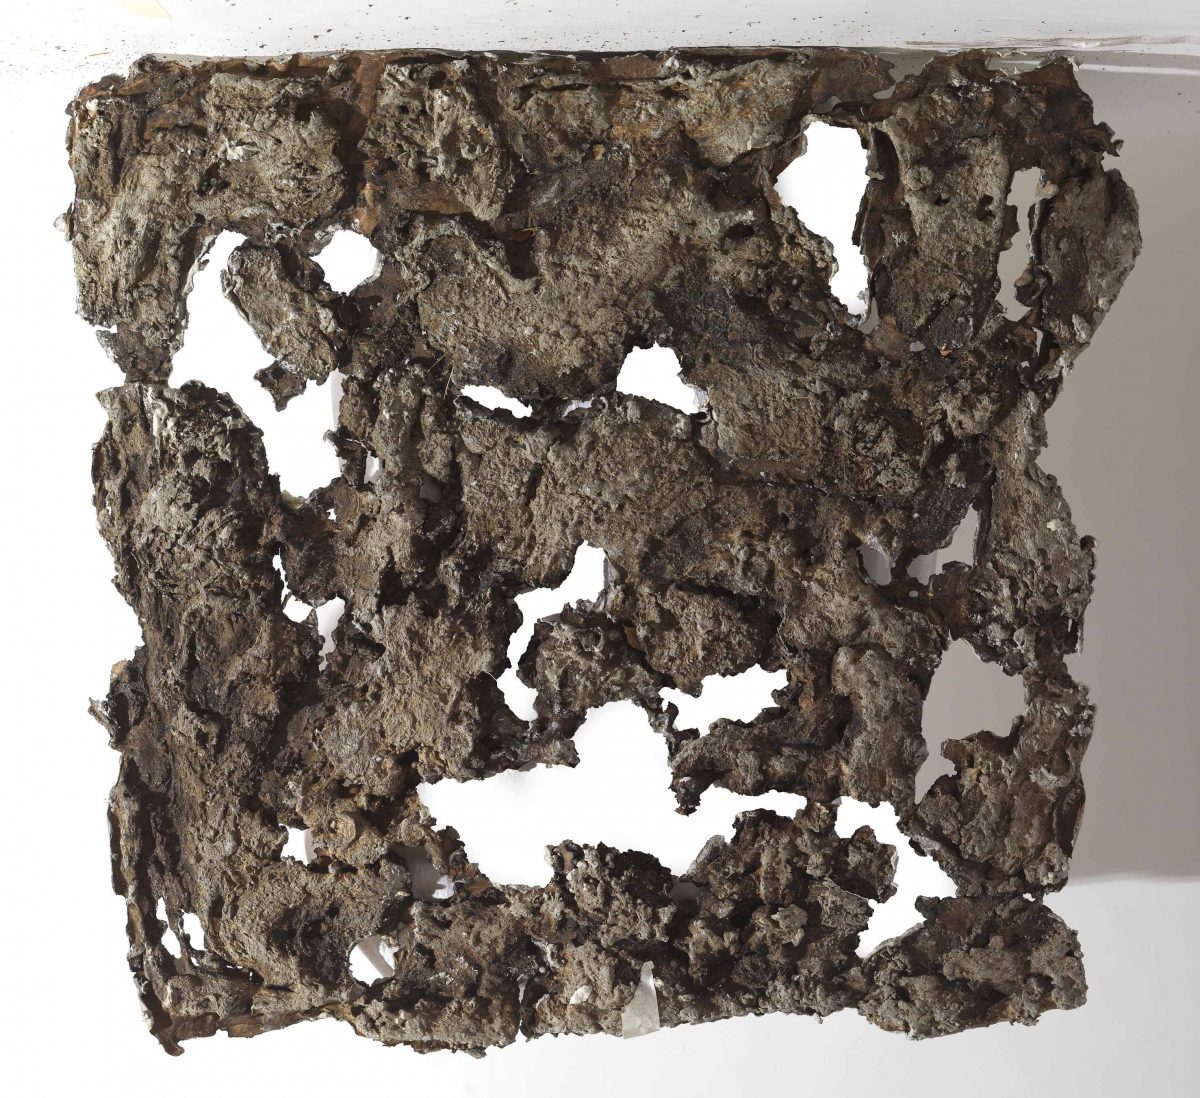 Mixed Media: burned  grey cement -resins. Dimensions 50X50